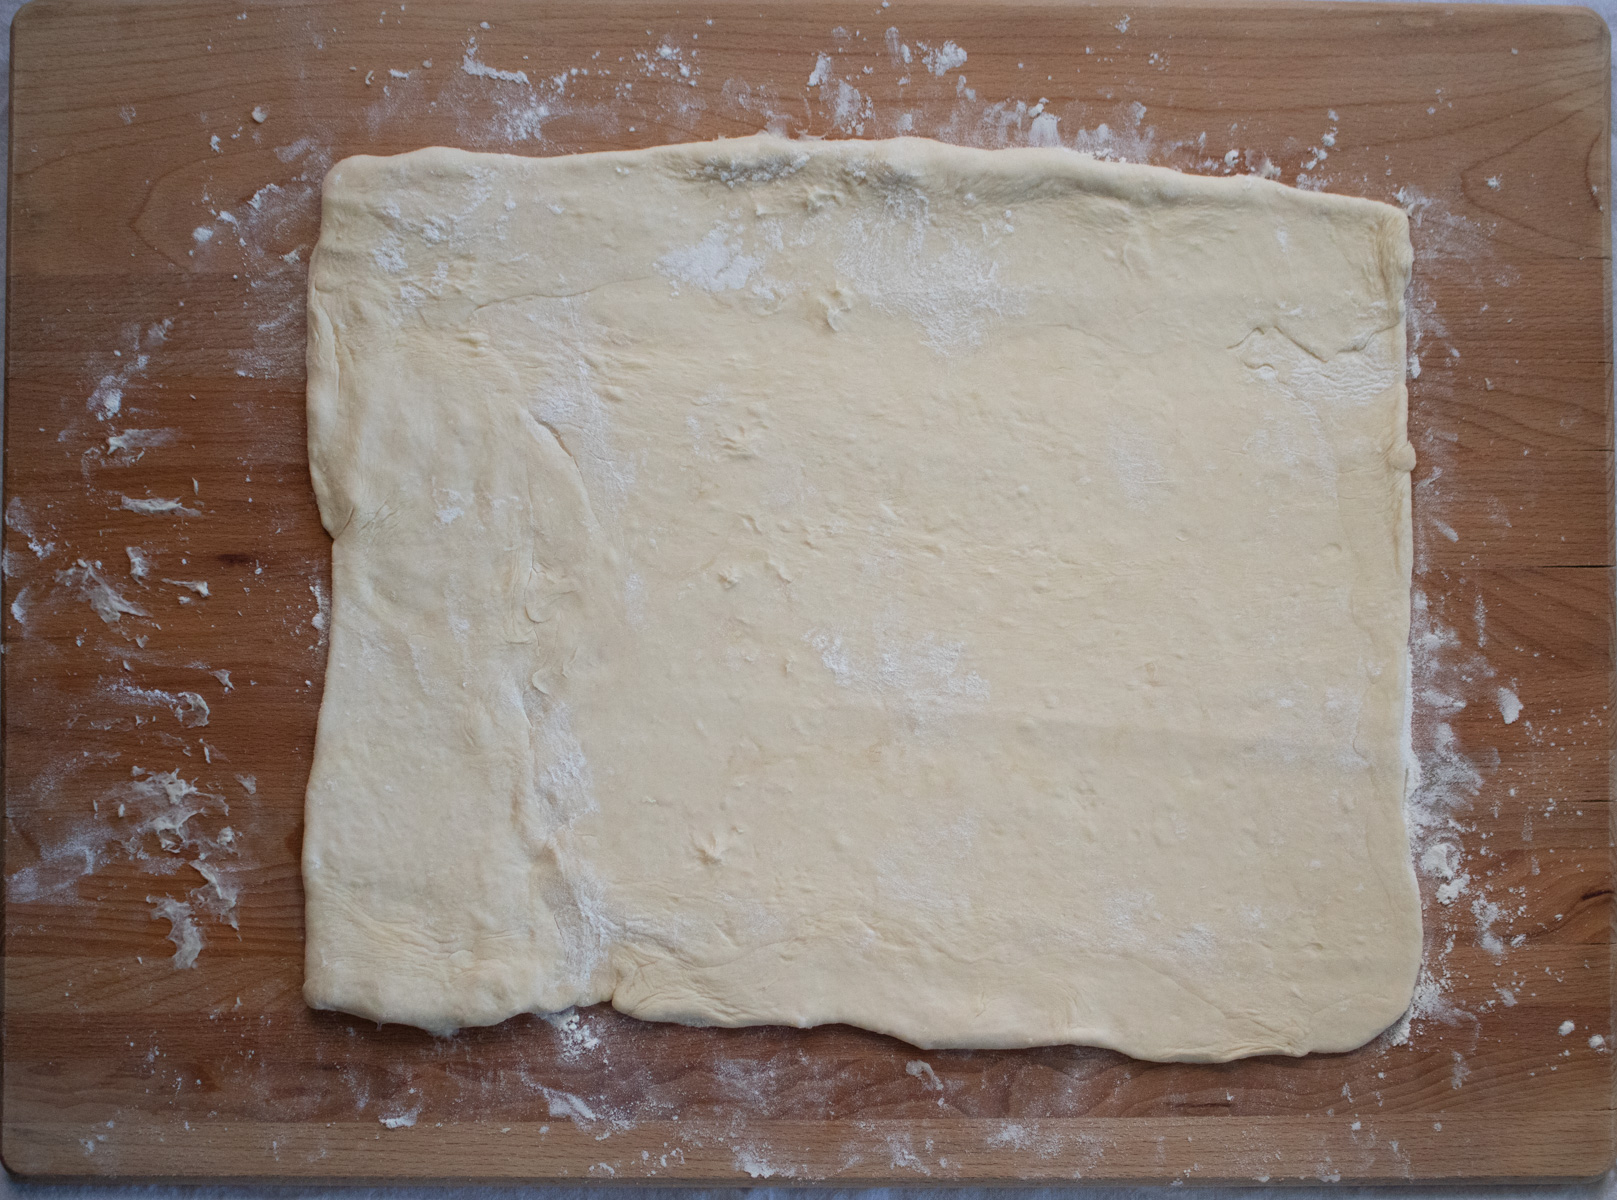 Knish dough rolled out into a rectangle